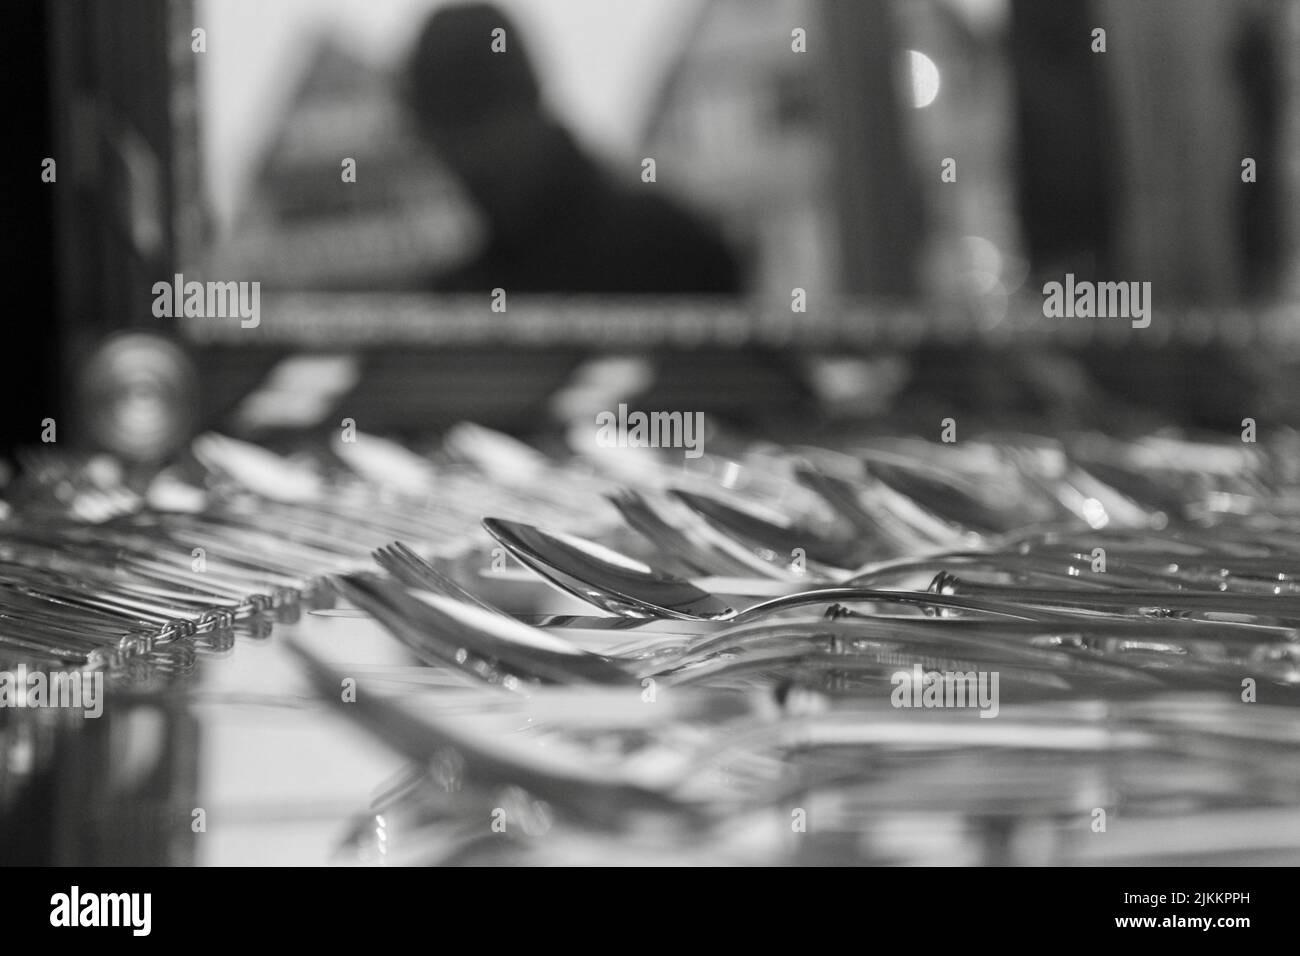 Silver spoons and forks on a blurred background in the buffet Stock Photo